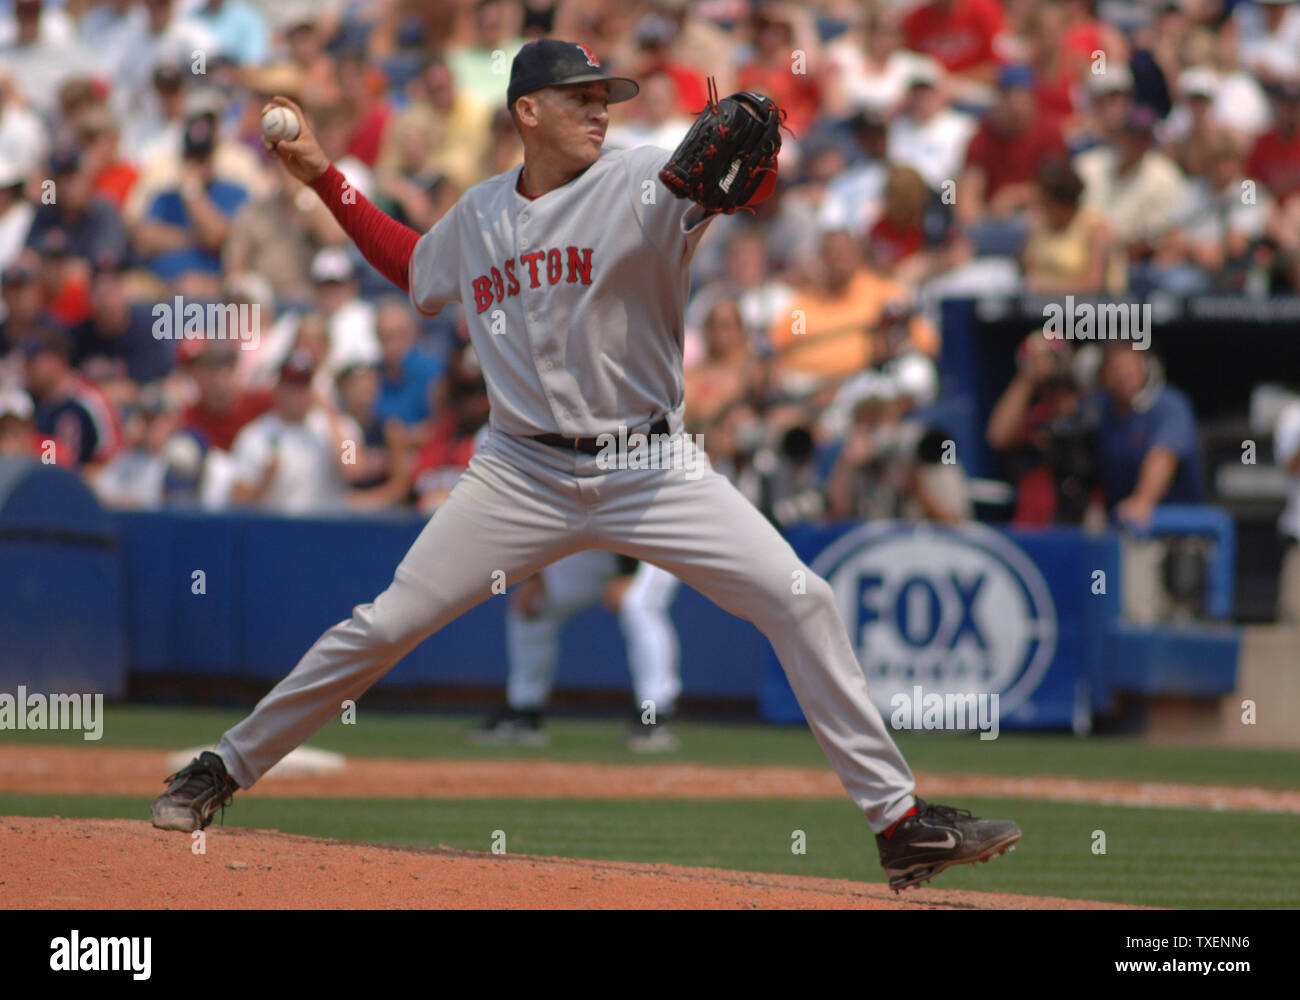 Boston Red Sox relief pitcher Julian Tavarez throws against the Atlanta Braves in the seventh inning June 17, 2006, in Atlanta's Turner Field. The Red Sox defeated the Braves 5-3 (UPI Photo/John Dickerson) Stock Photo